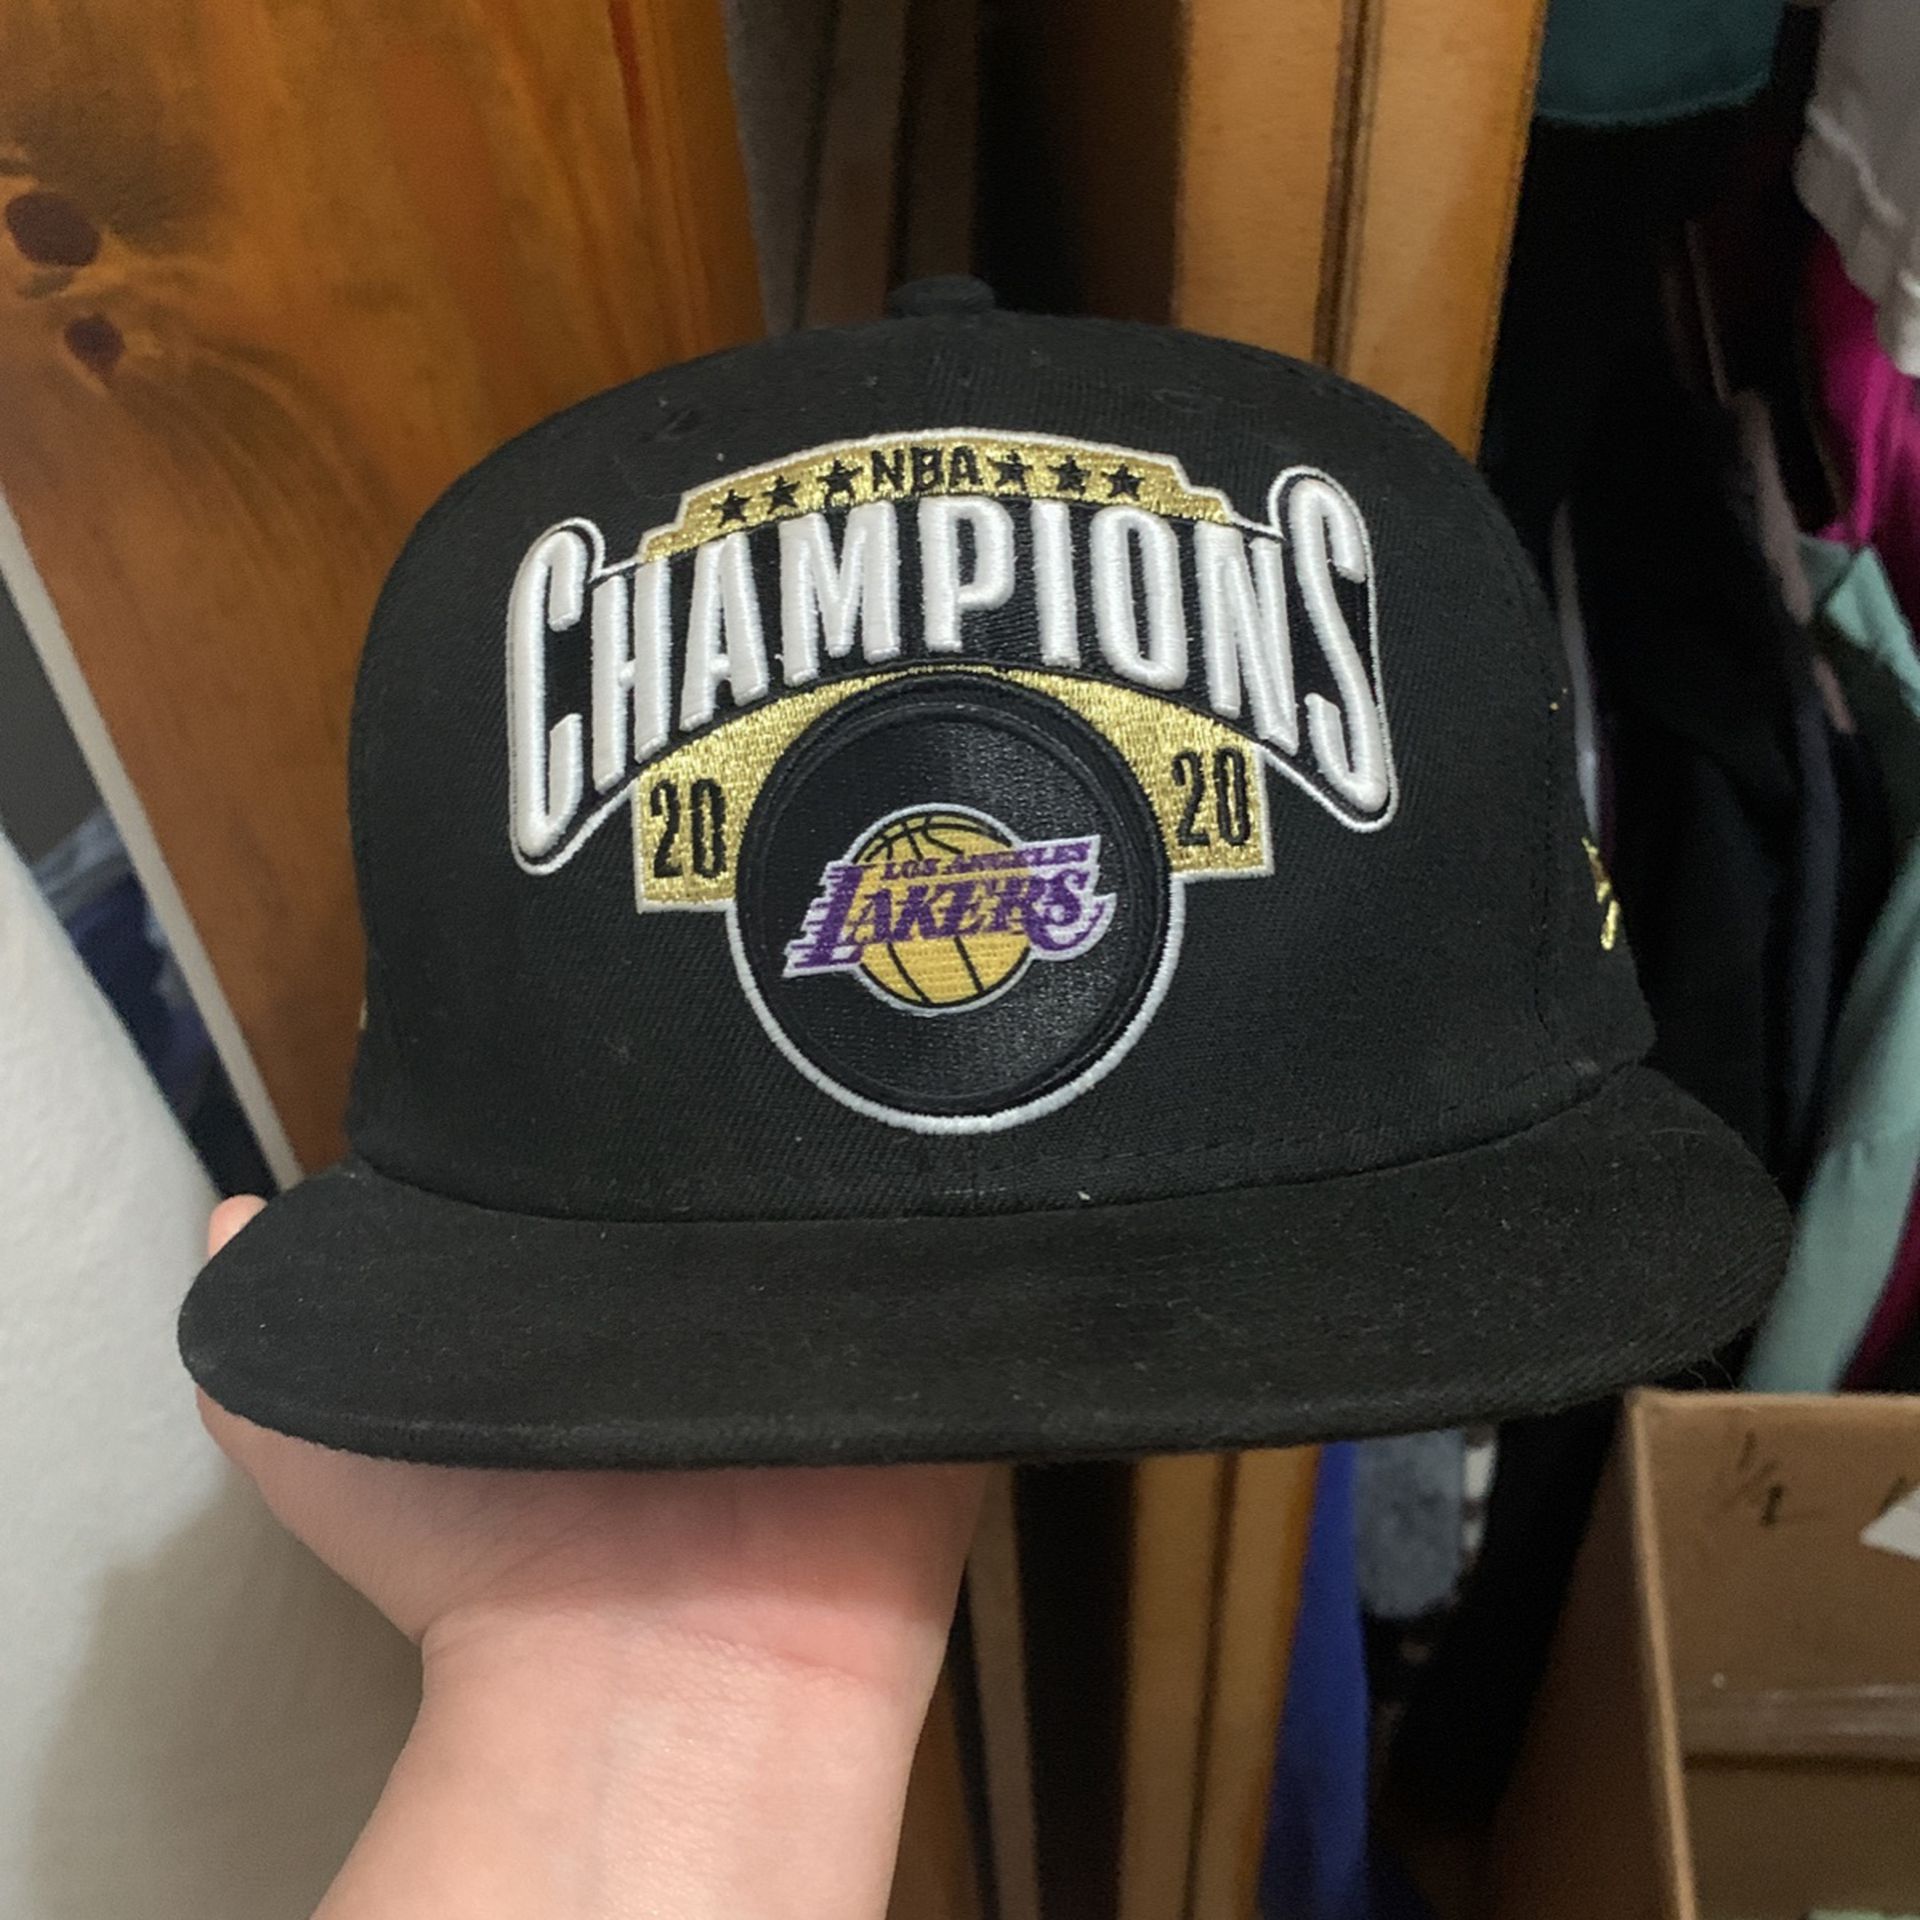 Champions lakers hat